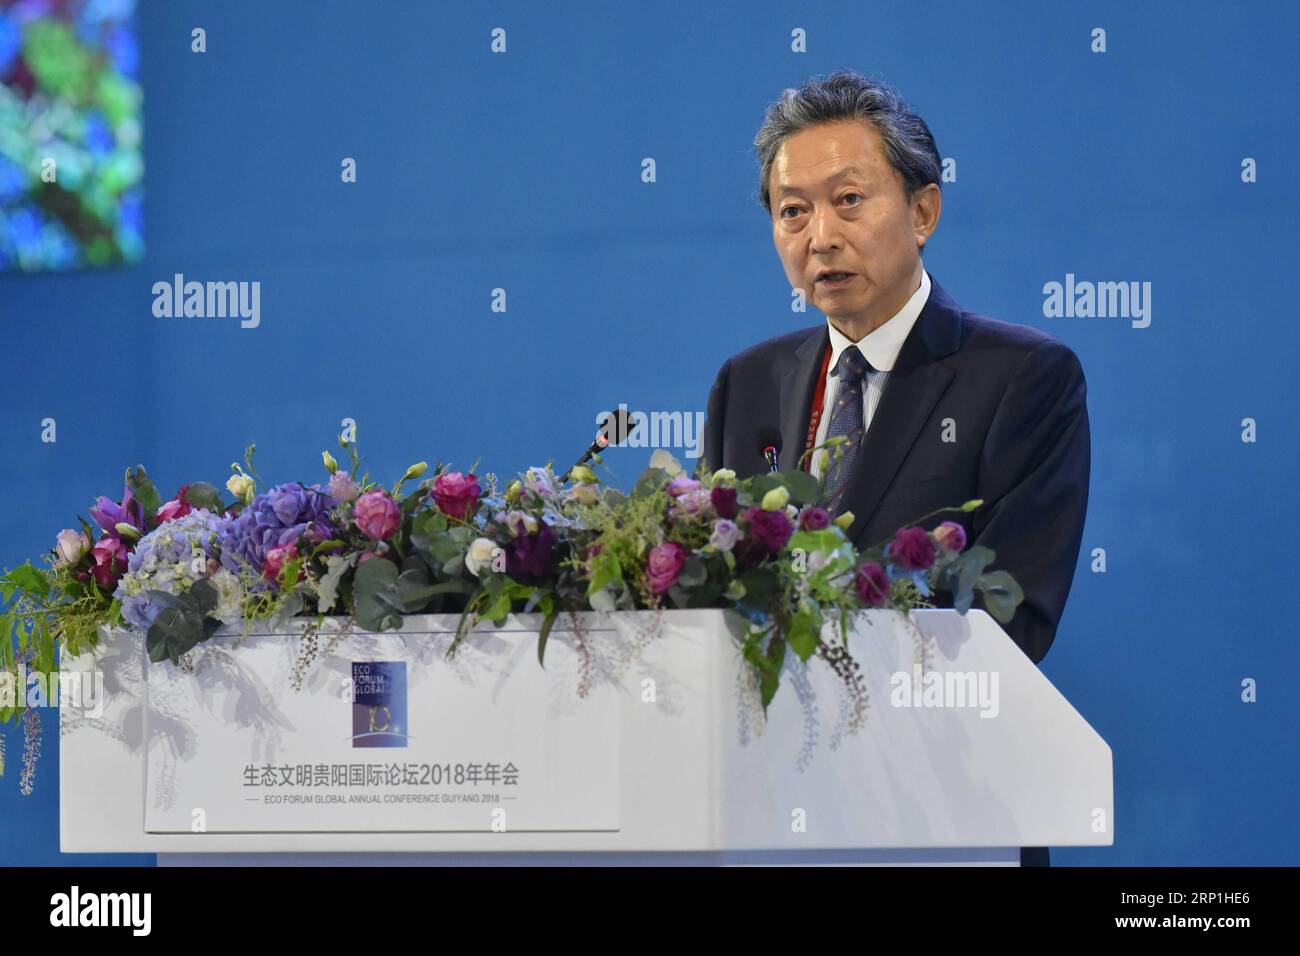 (180707) -- GUIYANG, July 7, 2018 -- Former Japanese Prime Minister Yukio Hatoyama speaks at the opening ceremony of the Eco Forum Global Annual Conference Guiyang 2018 held in Guiyang, capital of southwest China s Guizhou Province, July 7, 2018. )(ly) CHINA-GUIYANG-ECO FORUM-OPENING (CN) OuxDongqu PUBLICATIONxNOTxINxCHN Stock Photo